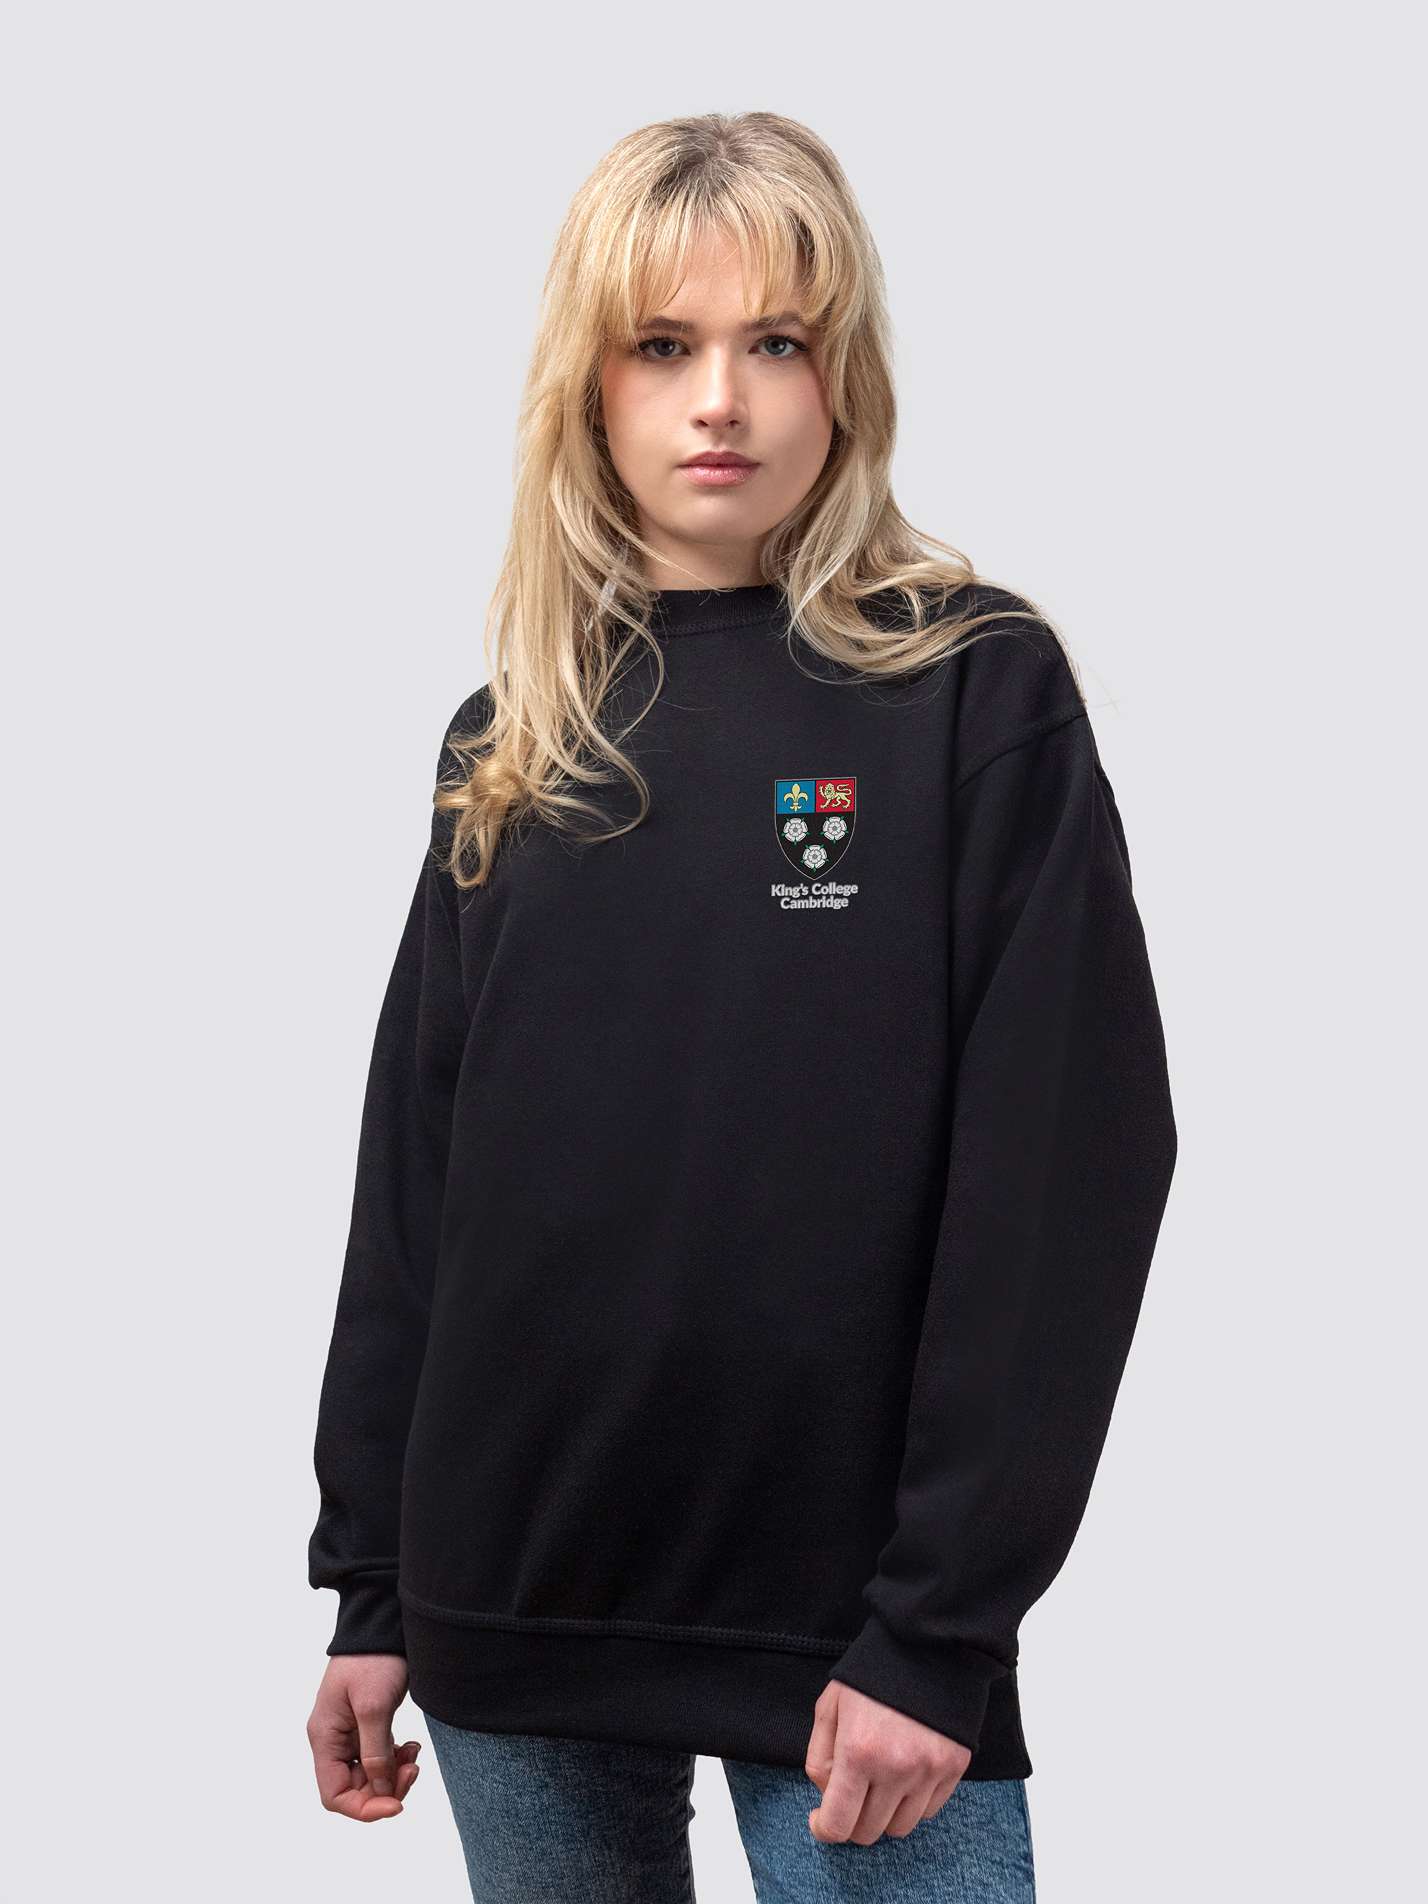 King's crest on the front of a black, crew-neck sweatshirt